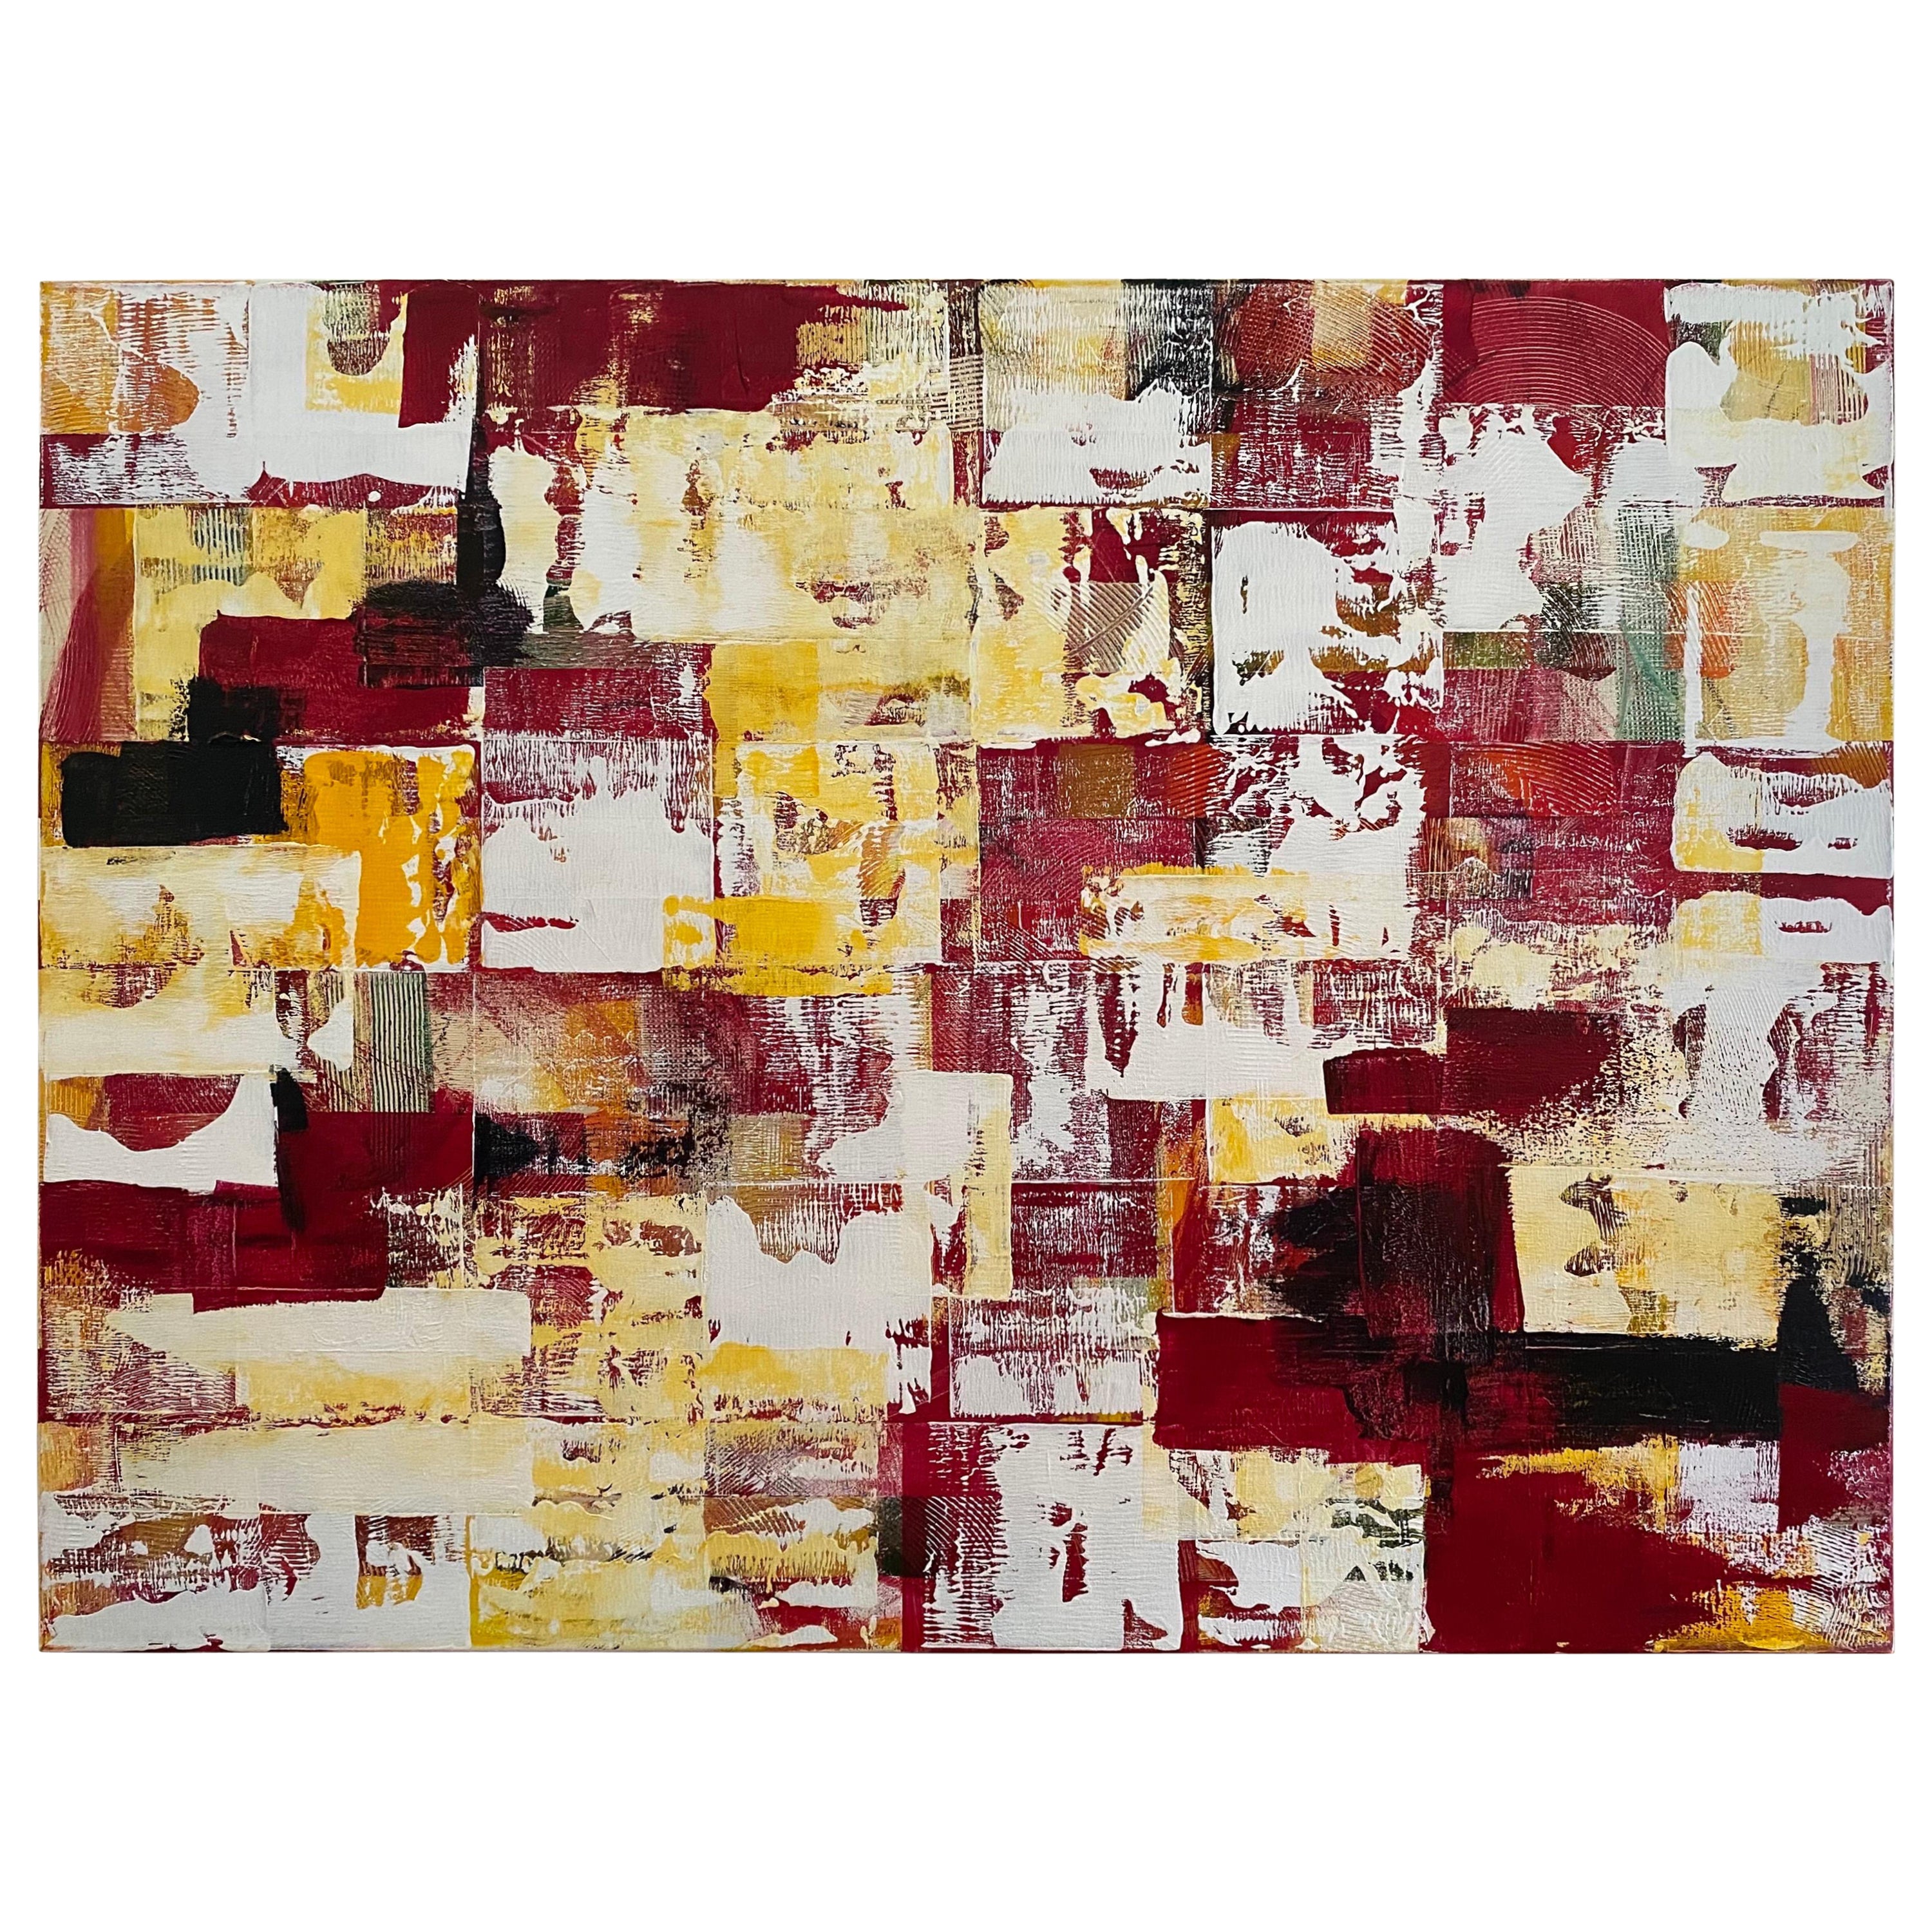 Large Red & Yellow Abstract Painting Titled "Geranium" by Rebecca Ruoff, 2021